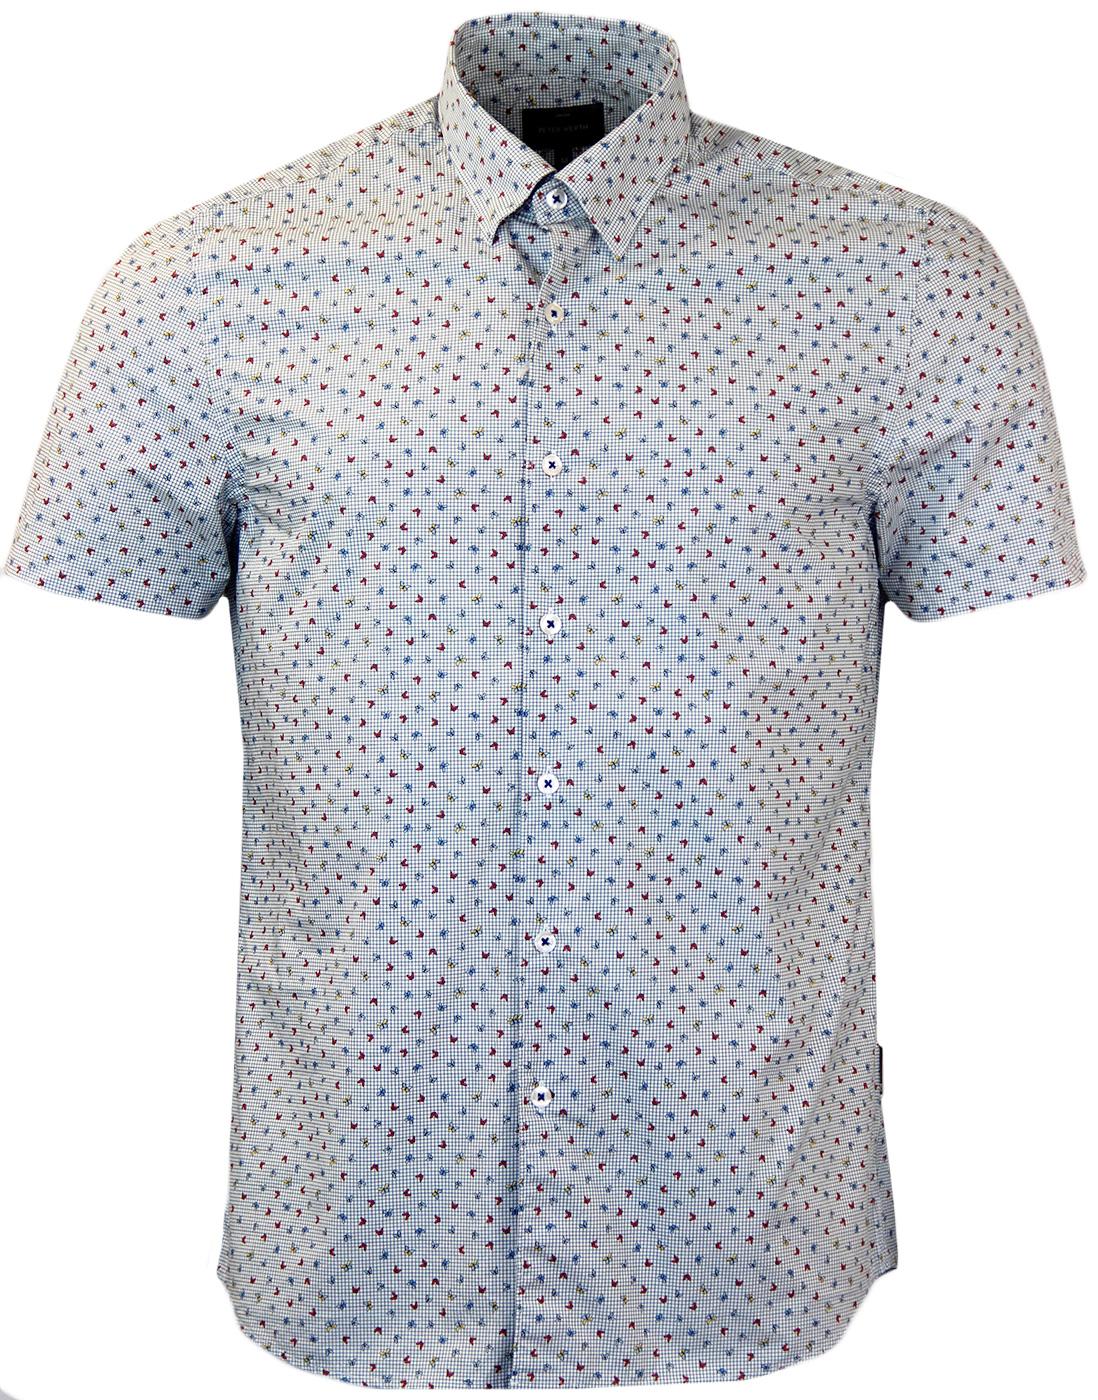 PETER WERTH Parade Retro Butterfly Print Shirt in Blue